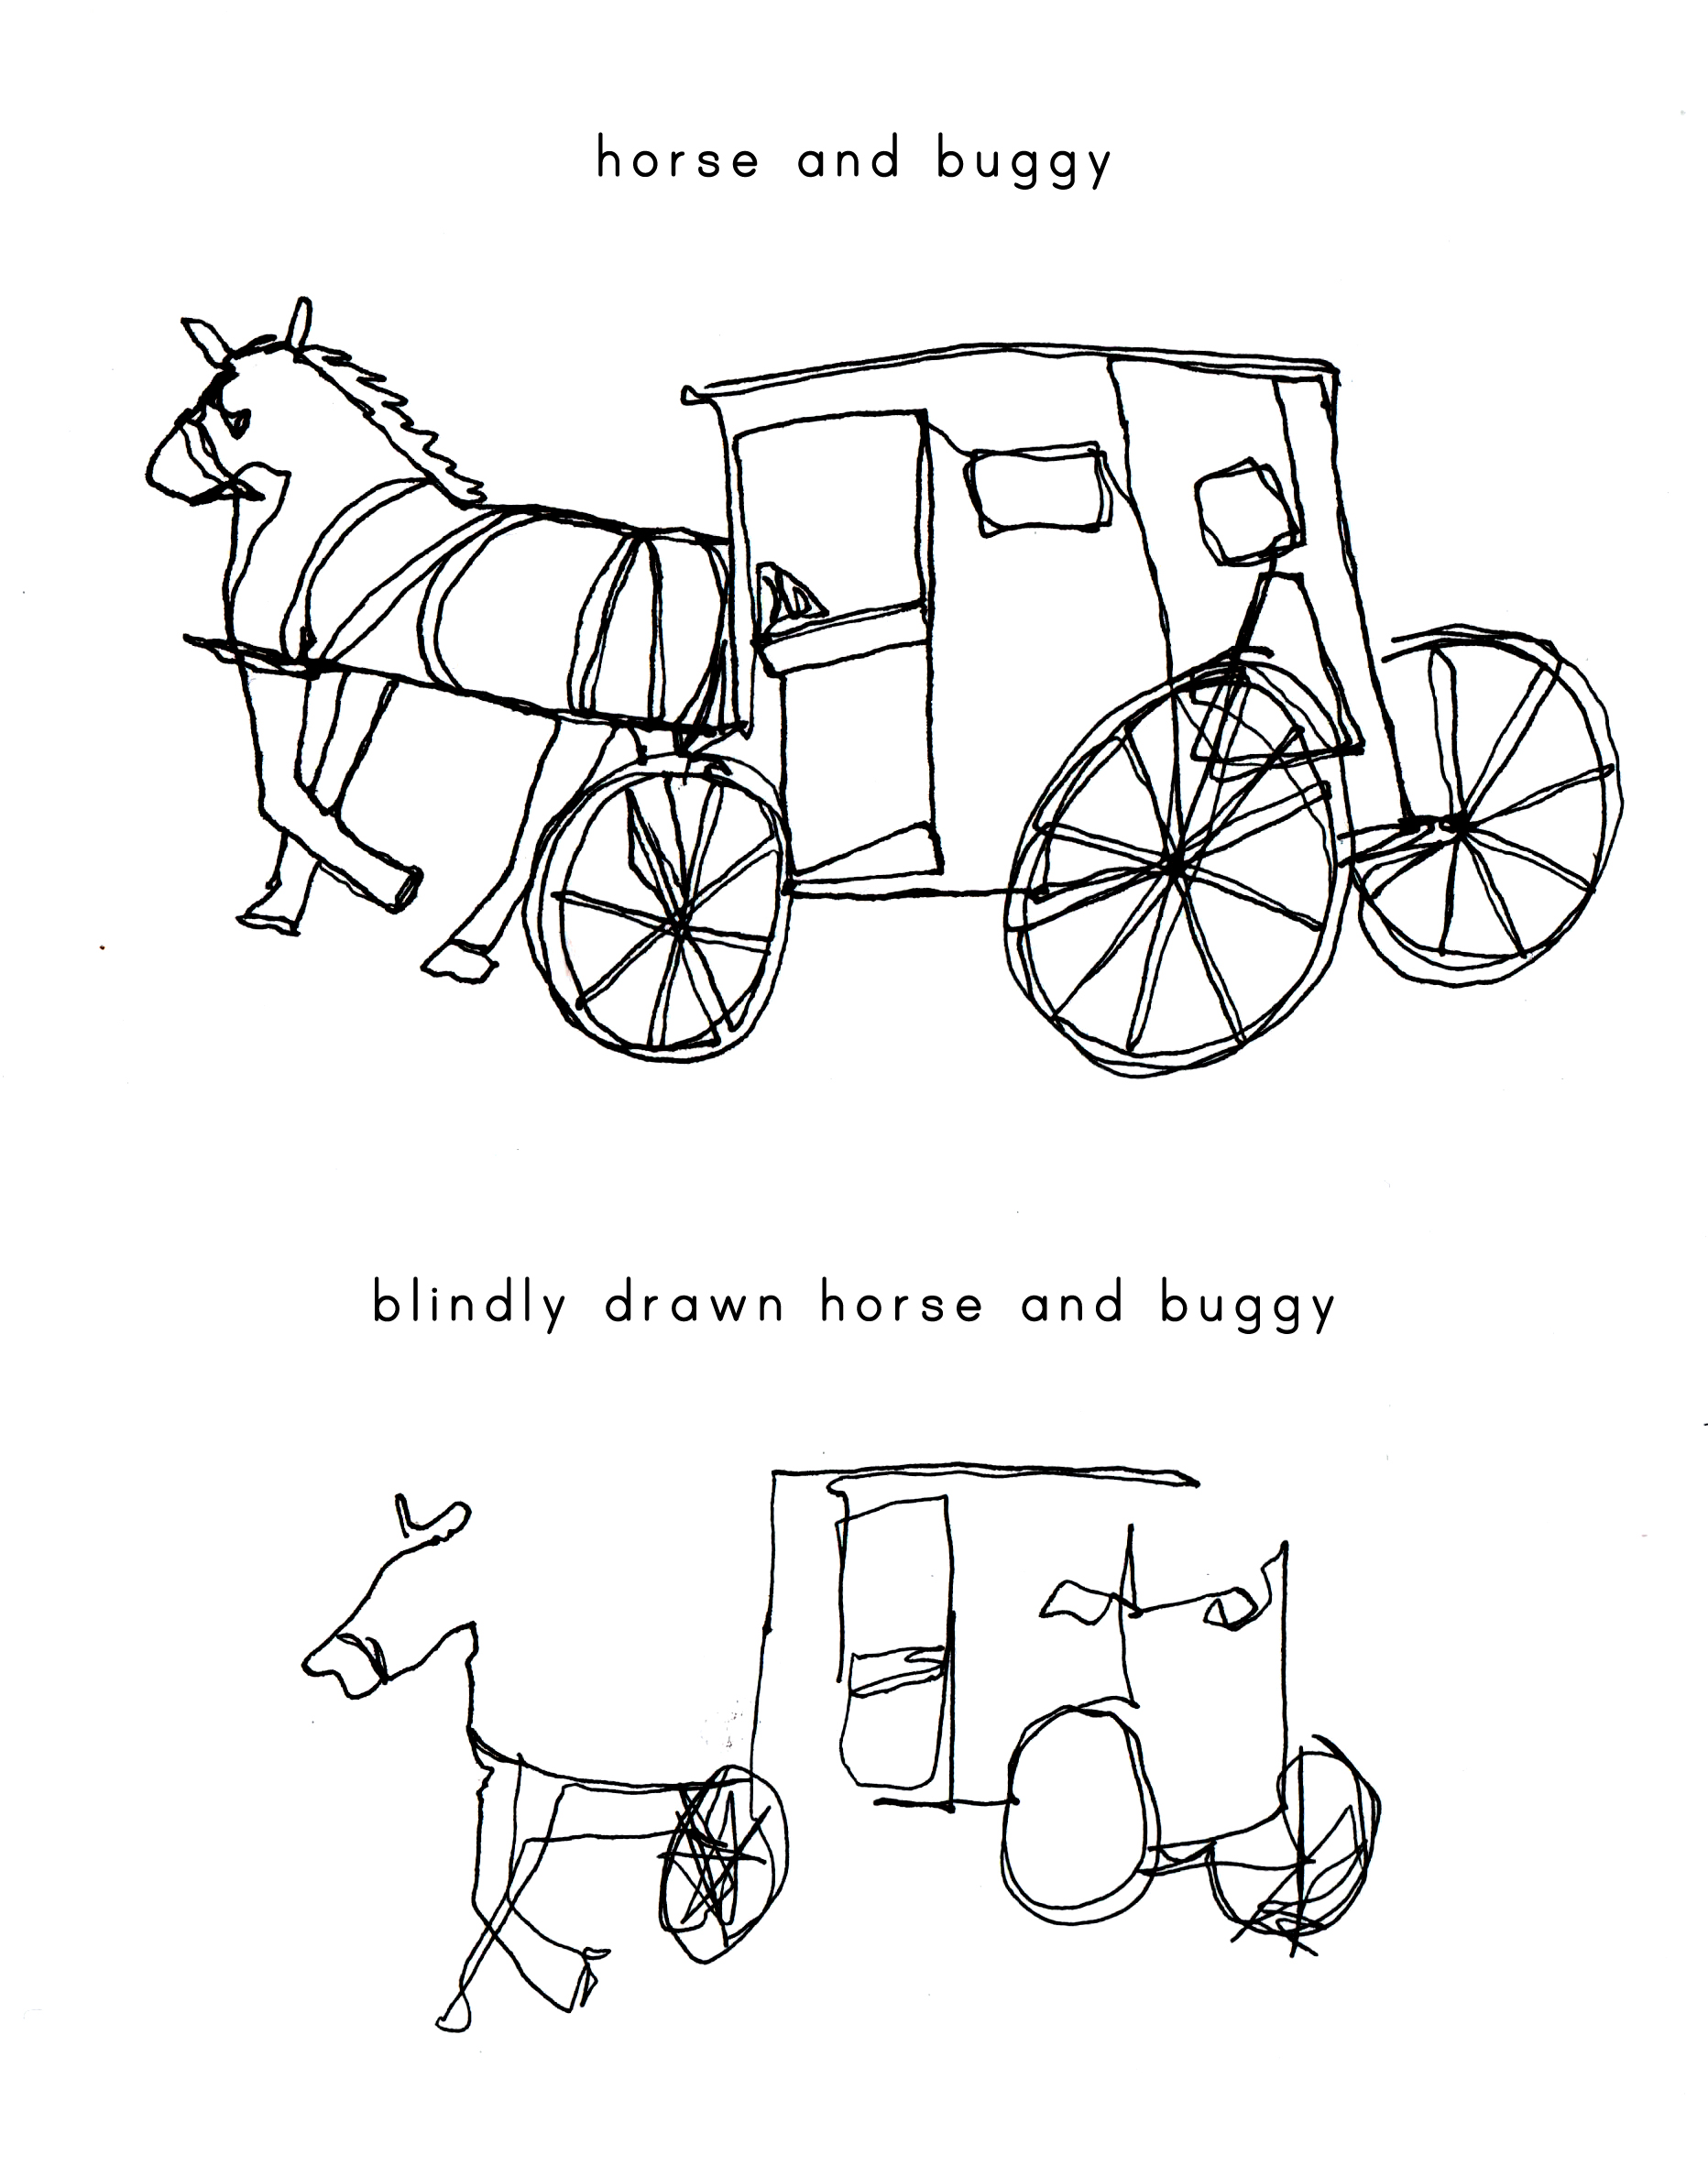 continuous line horse and buggy